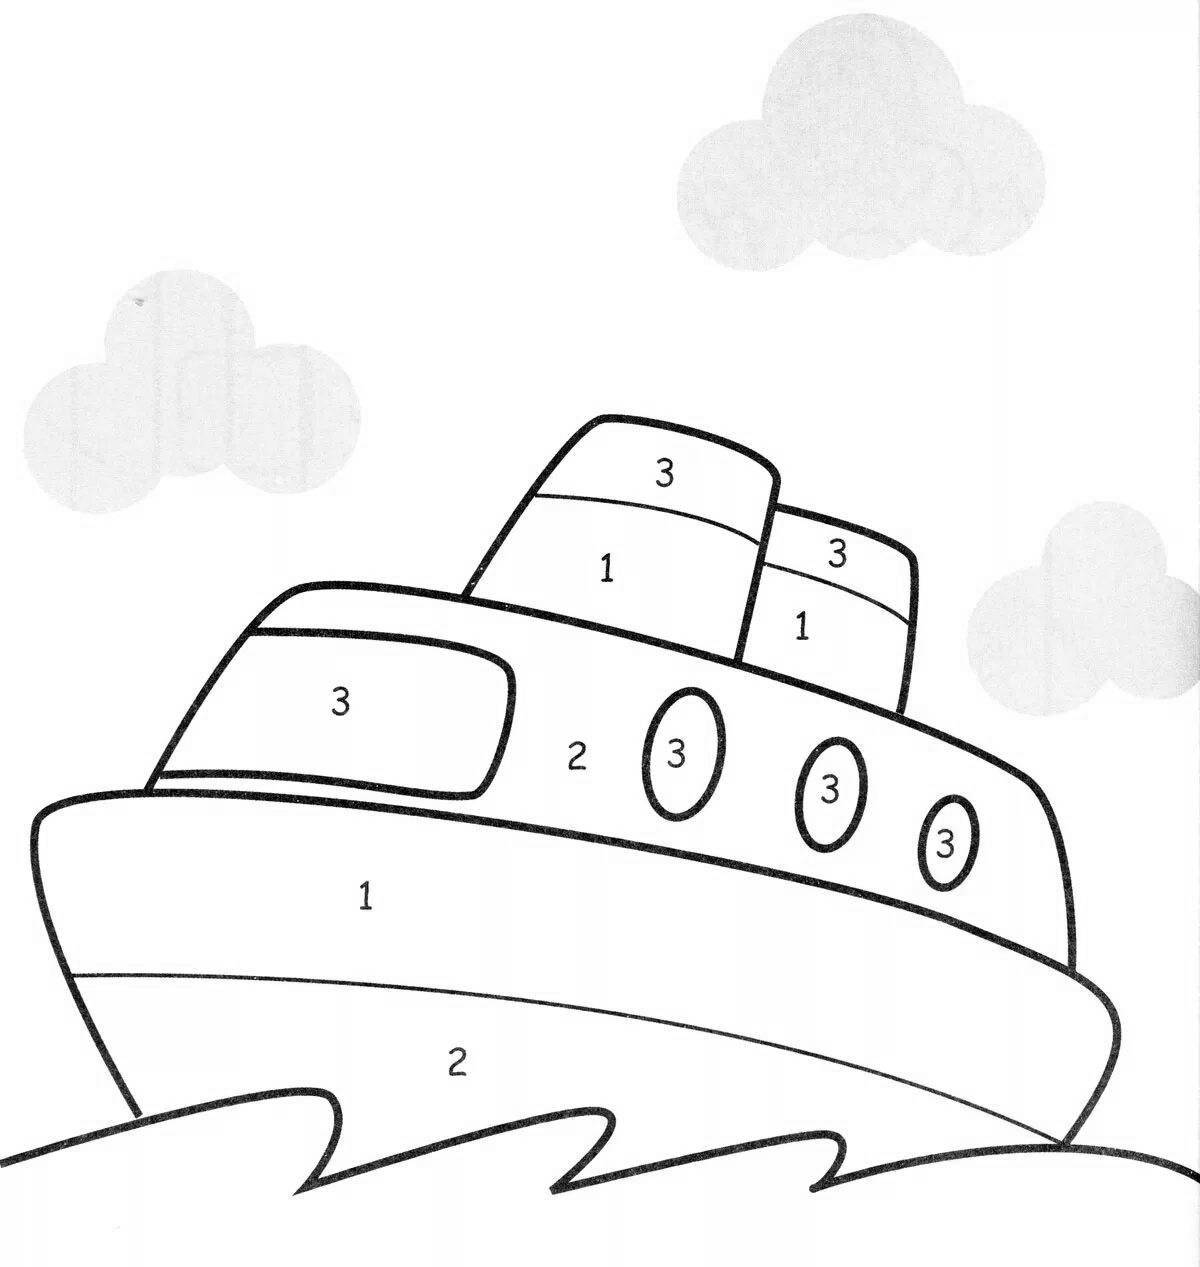 Coloring bright ship by numbers